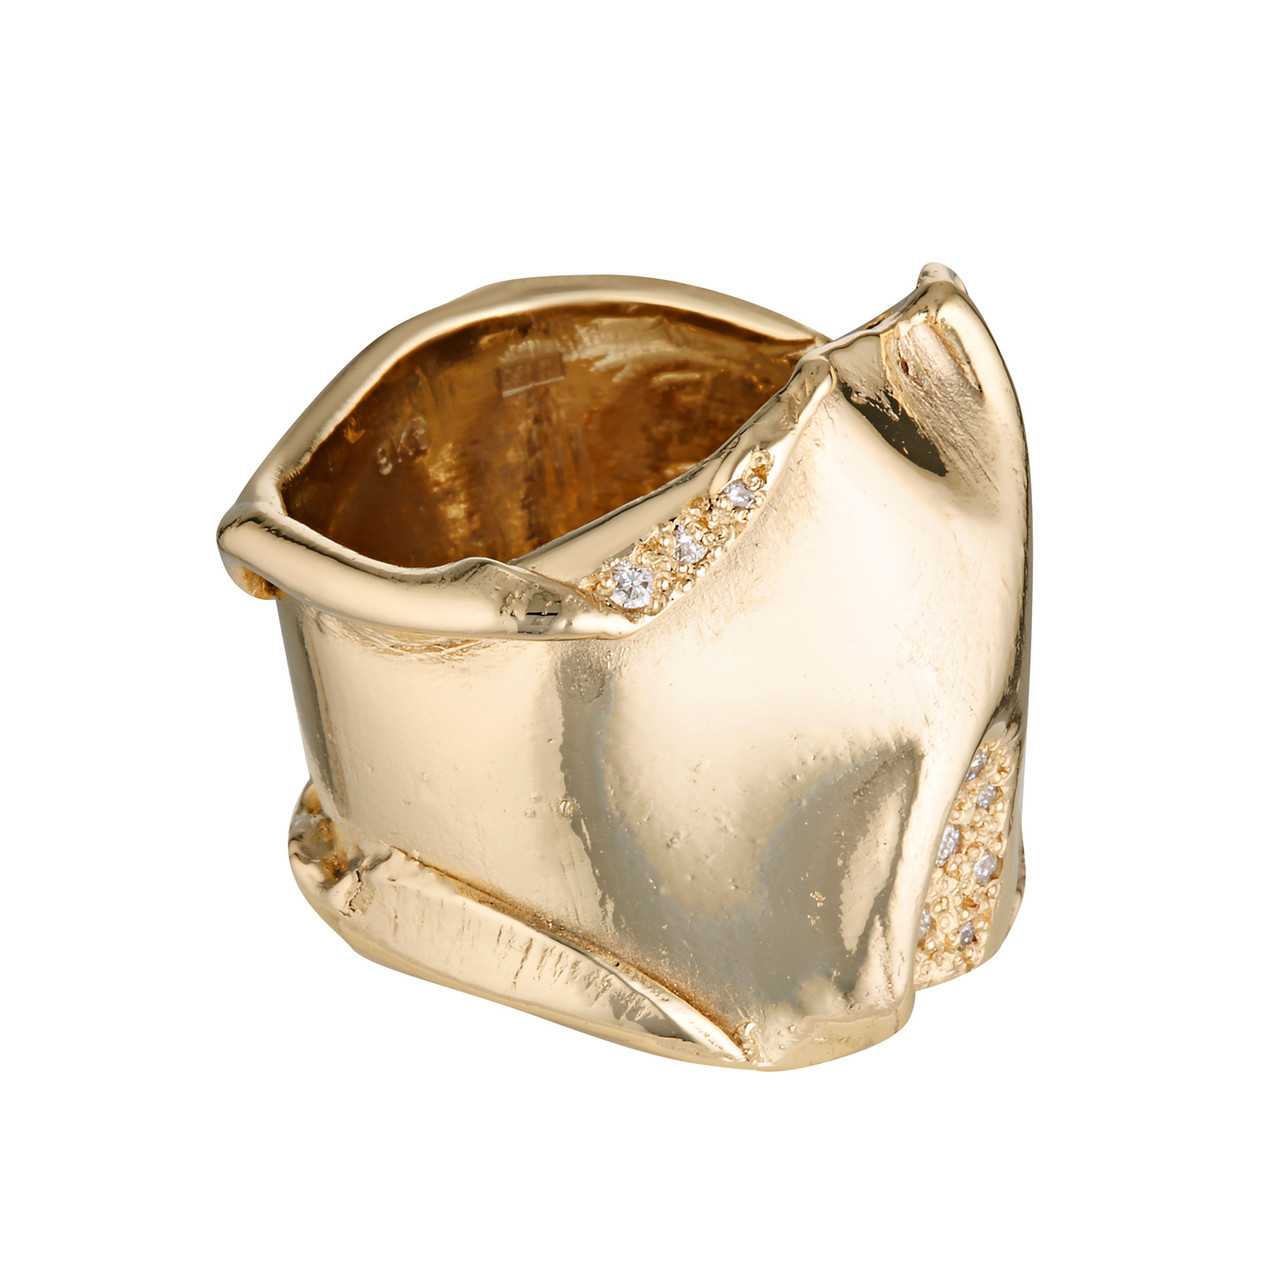 Athena Gold Textured Wide Ring, Mia Chicco, tomfoolery